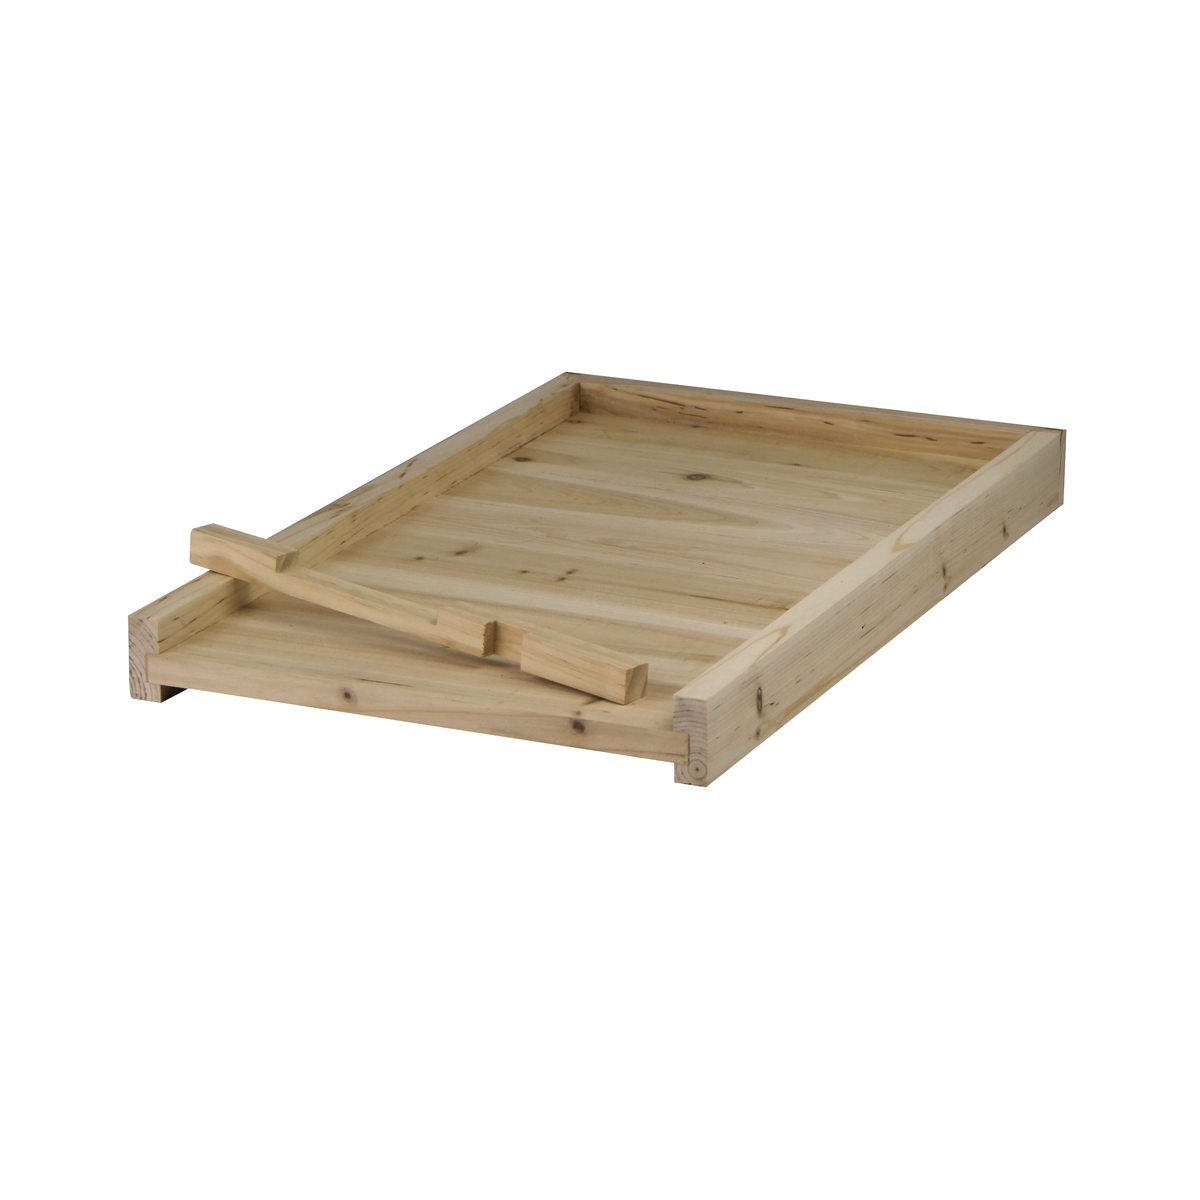 NuBee 8 Frame Solid Bottom Board With Entrance Reducer